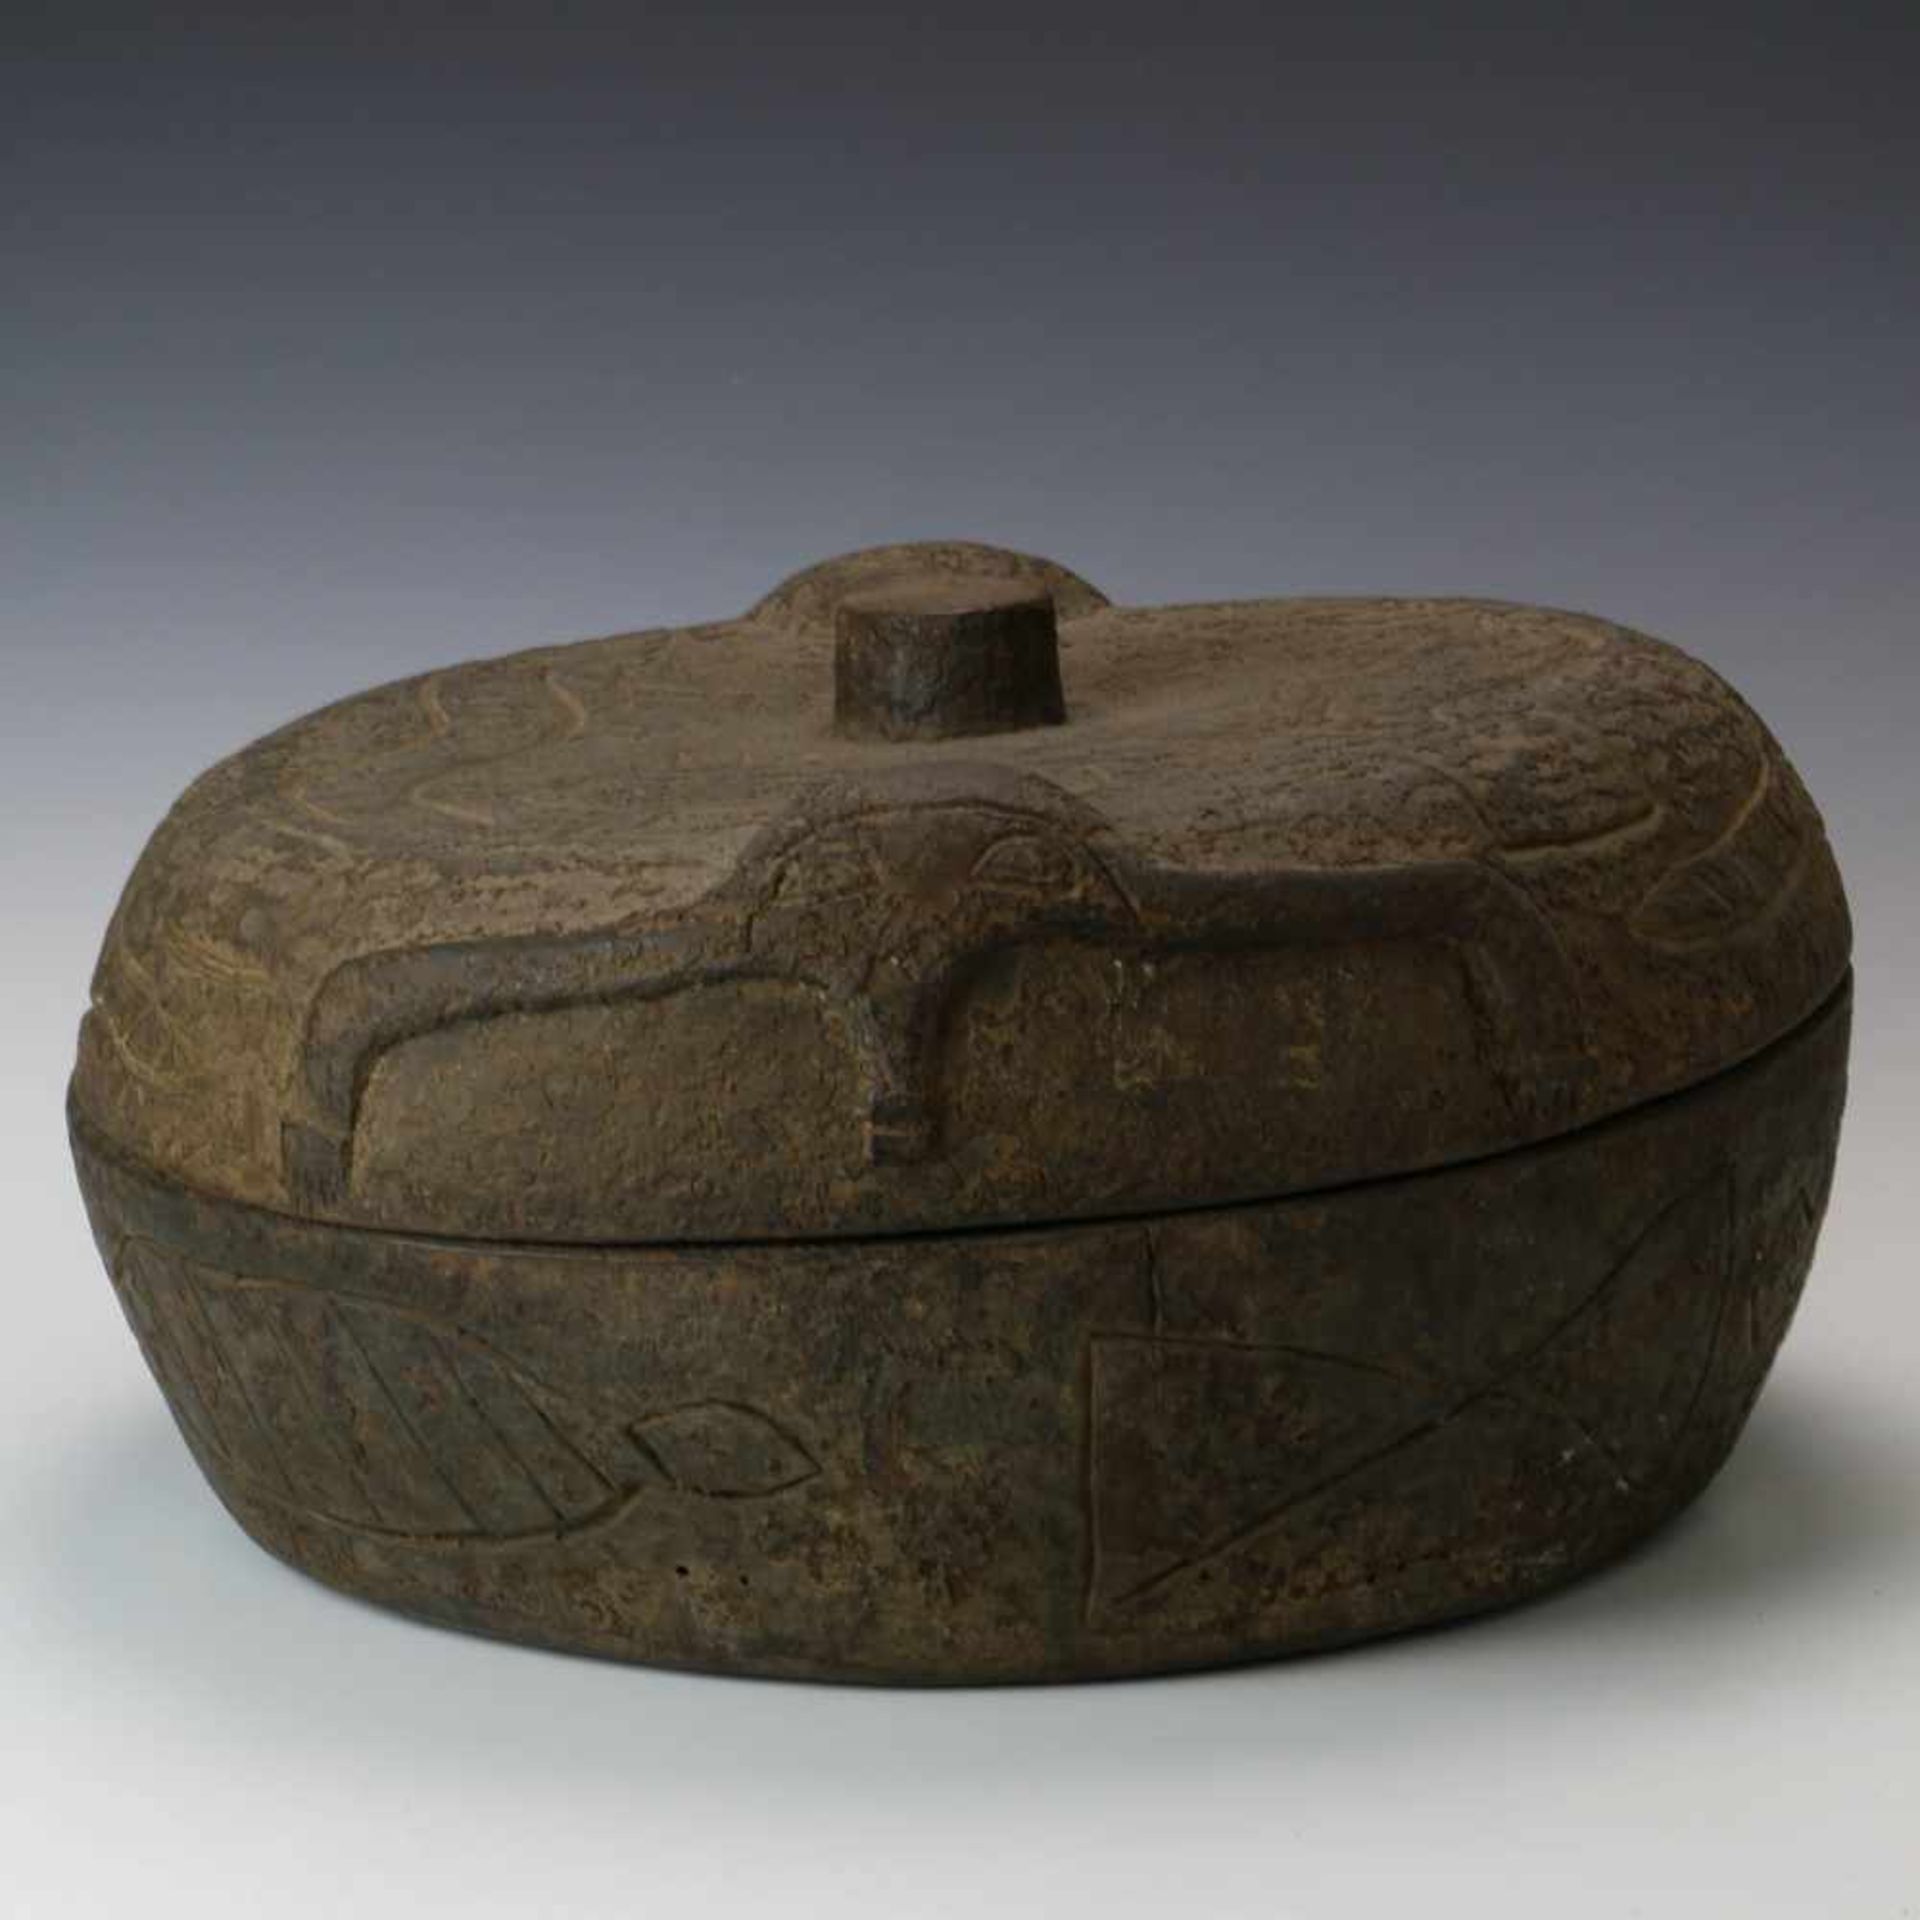 Yoruba, kola nut wooden boxwith carved animals and two anthropomorphic figures in relief. With